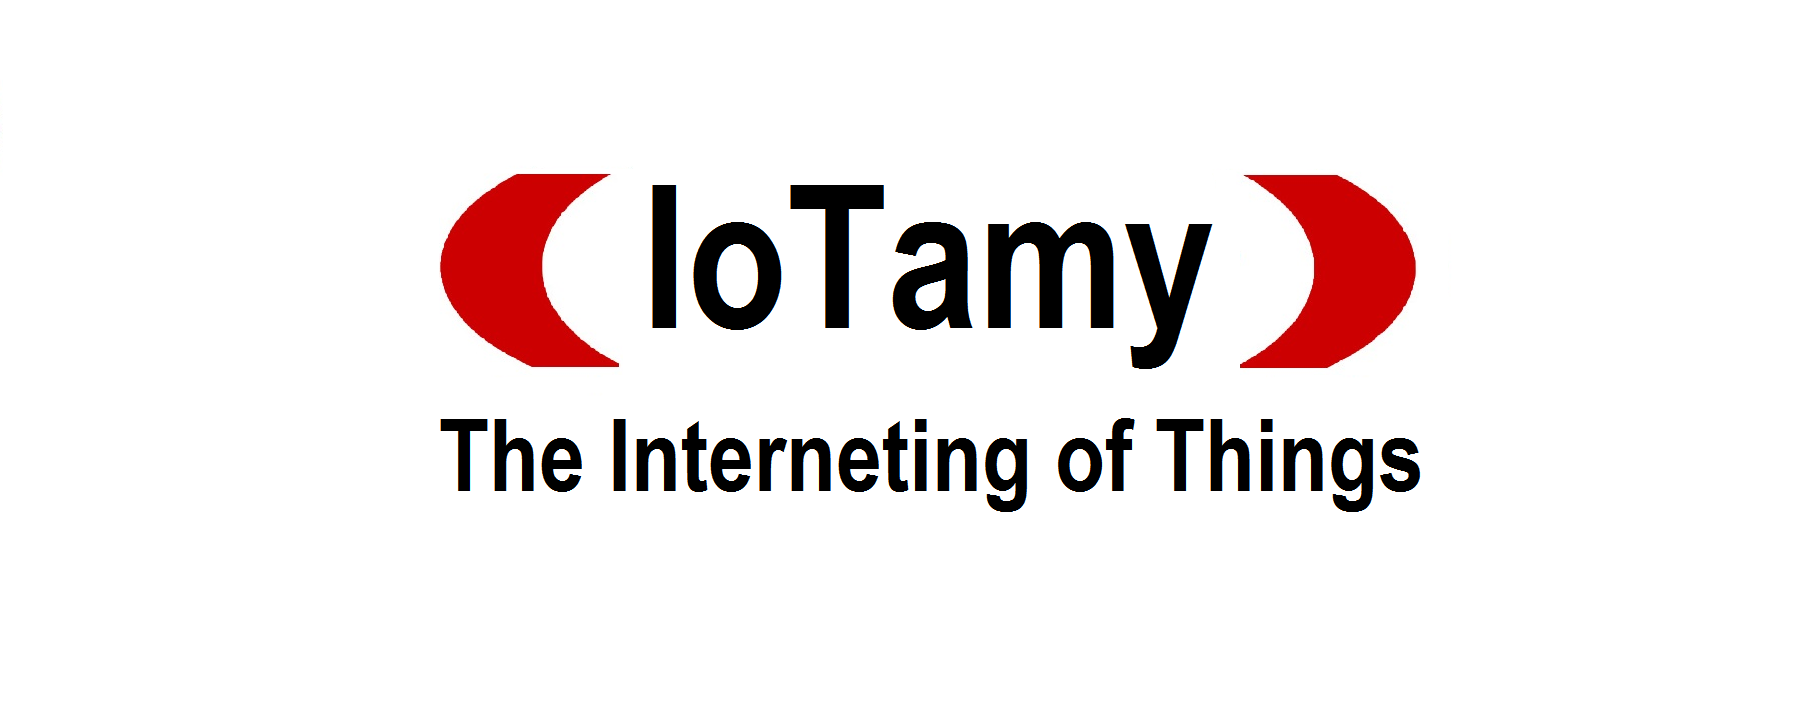 IoTamy, the Interneting of Things